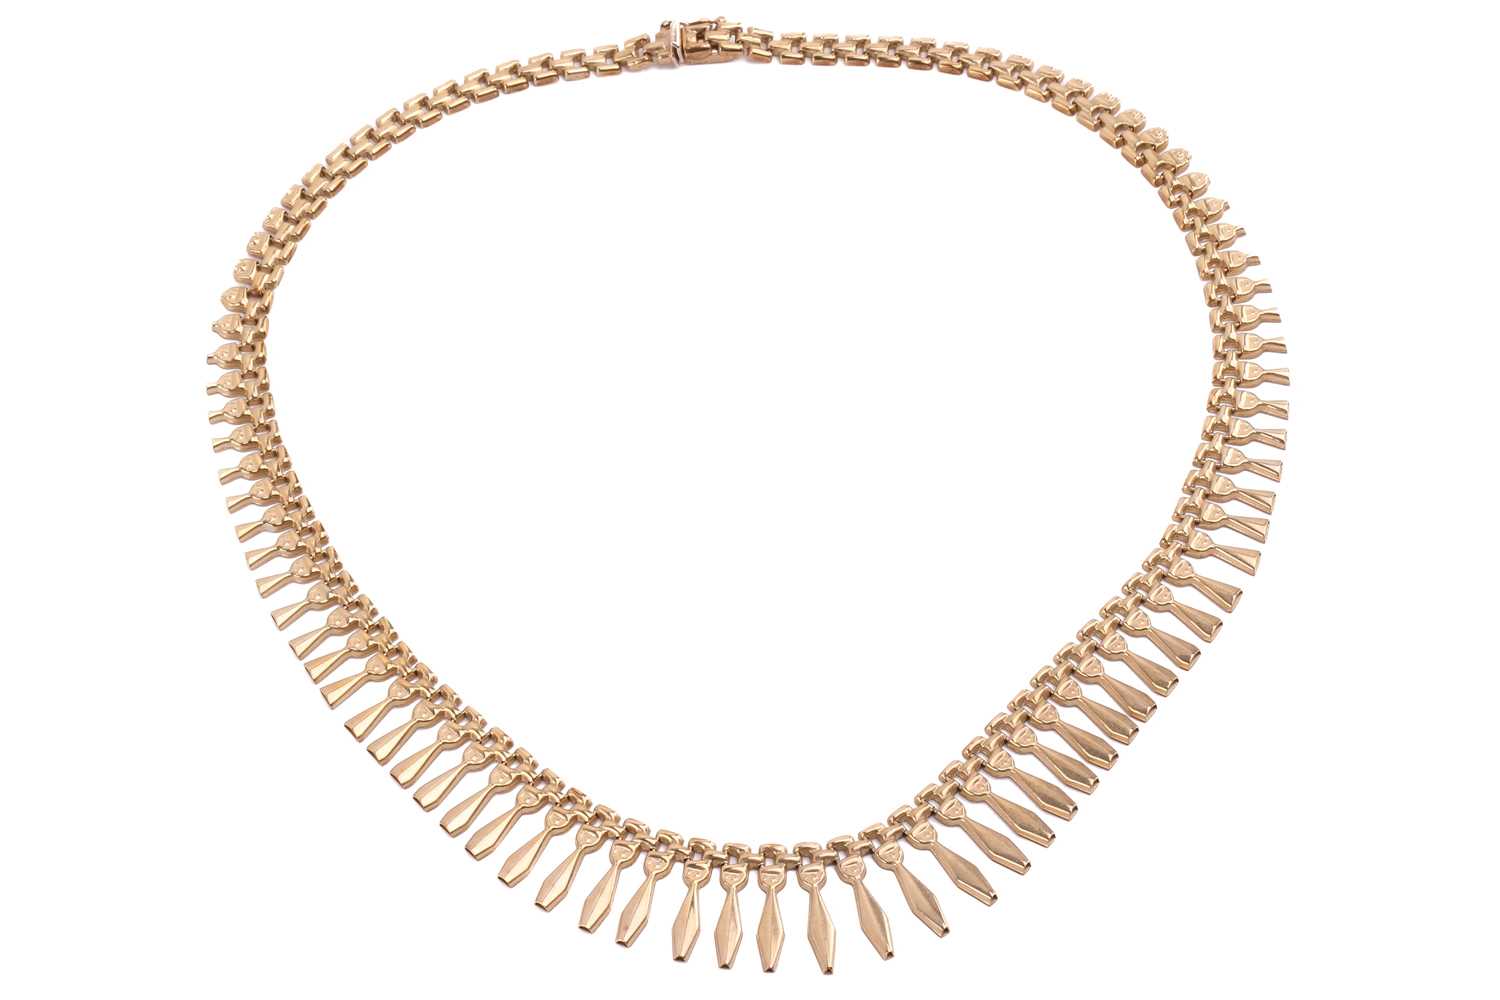 A fringe necklace in 9ct yellow gold, featuring an array of articulated and textured fringes in - Image 2 of 6